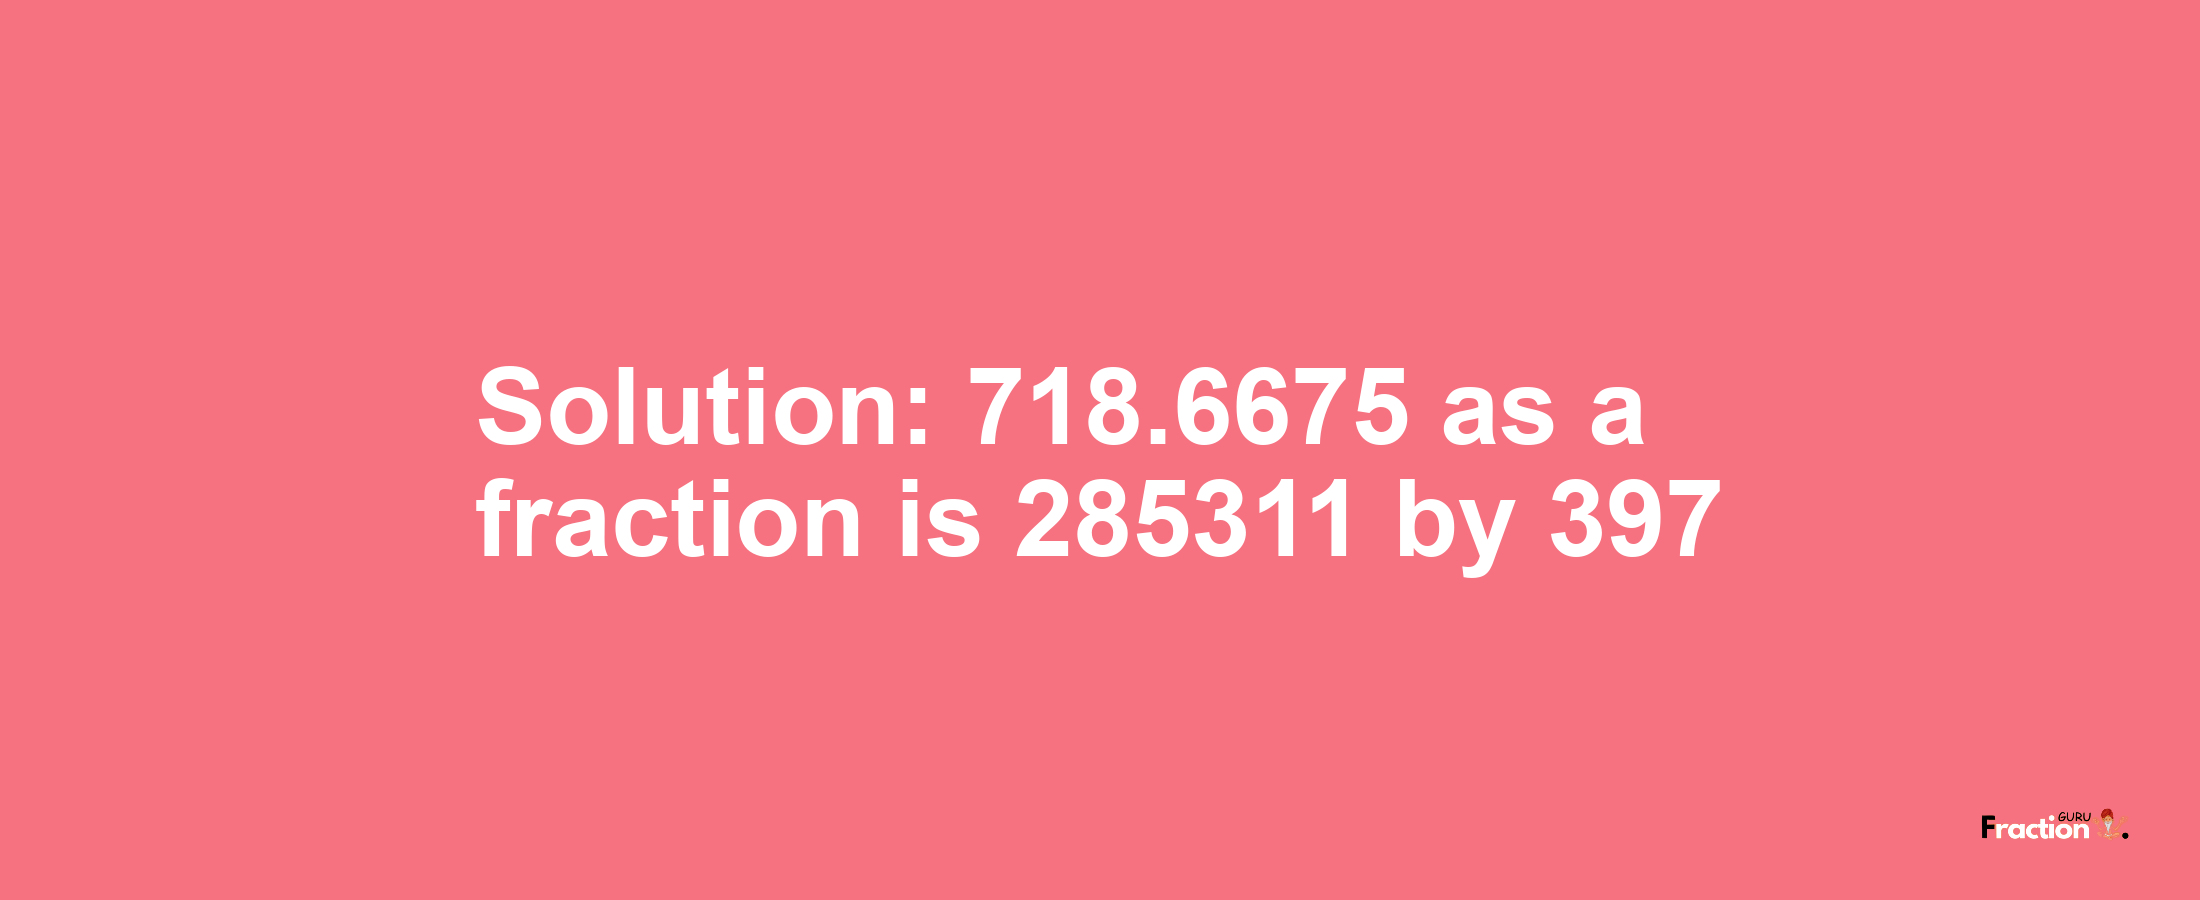 Solution:718.6675 as a fraction is 285311/397